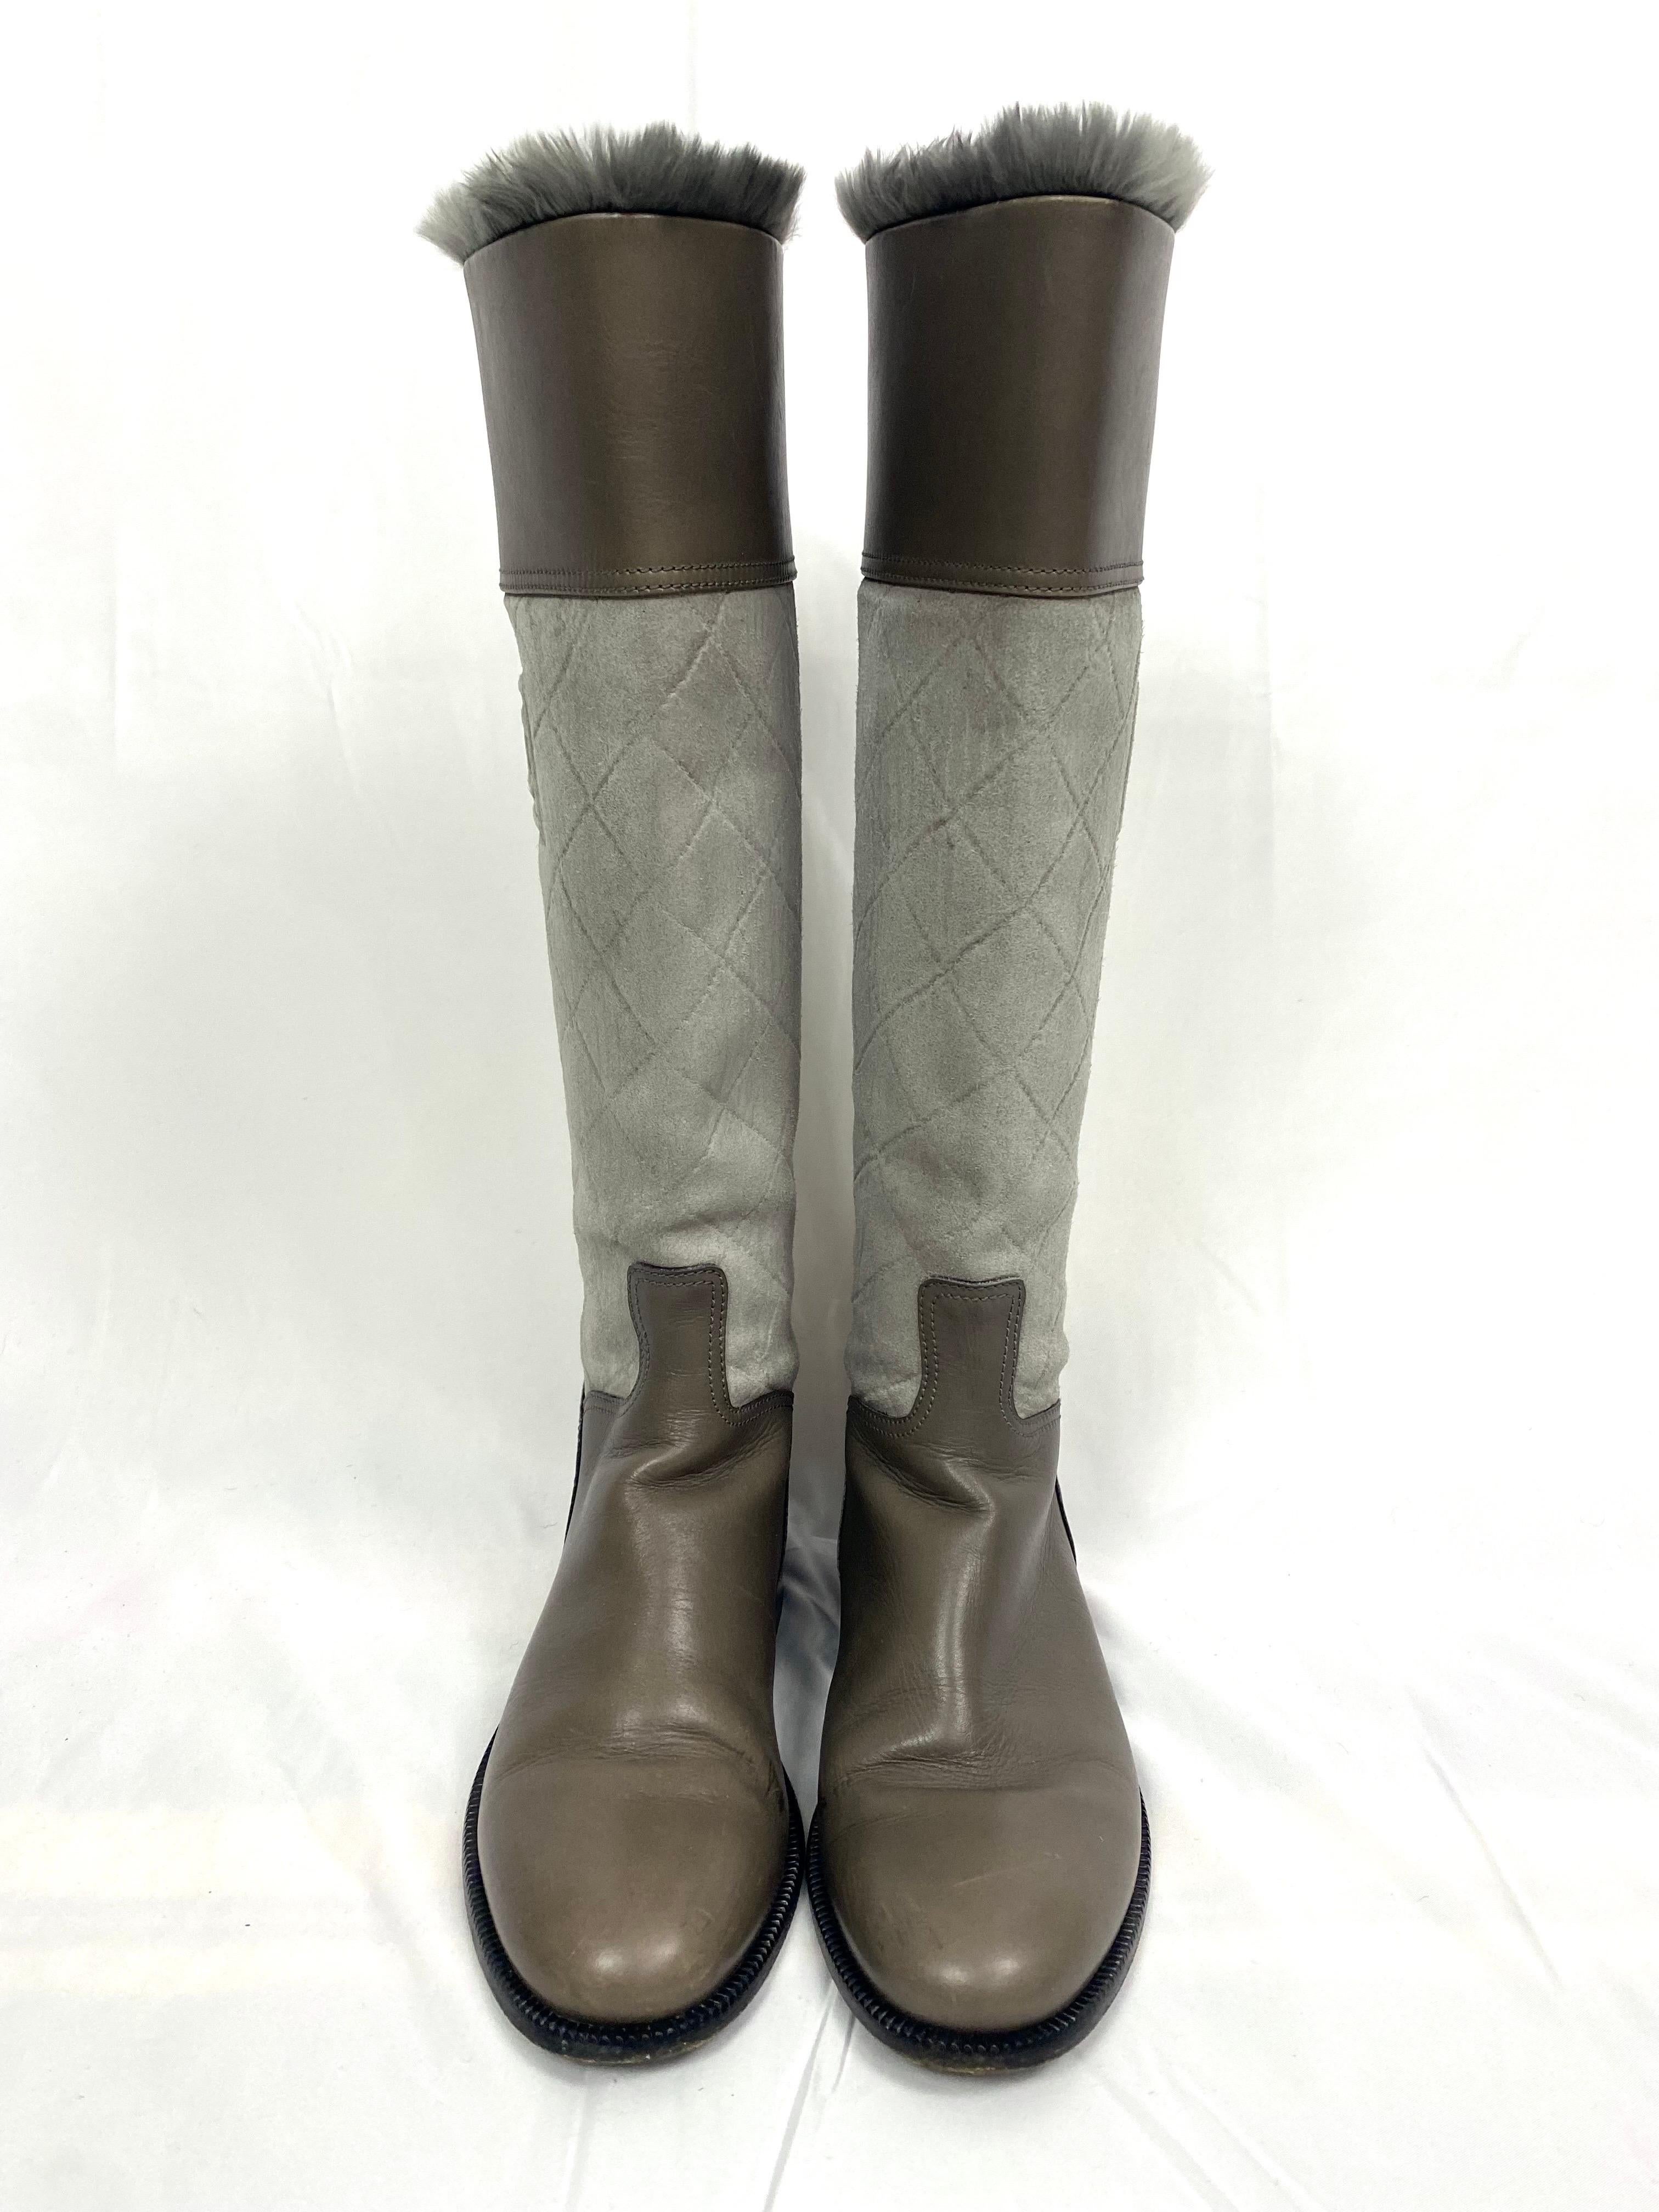 Beautiful pair of Chanel riding boots in gray/taupe quilted leather and suede.
Rabbit fur trim has the color.
Closing at the back with a zip and a snap tab with the CC logo, branded on the side (outside of the boot)
Interior lined in natural